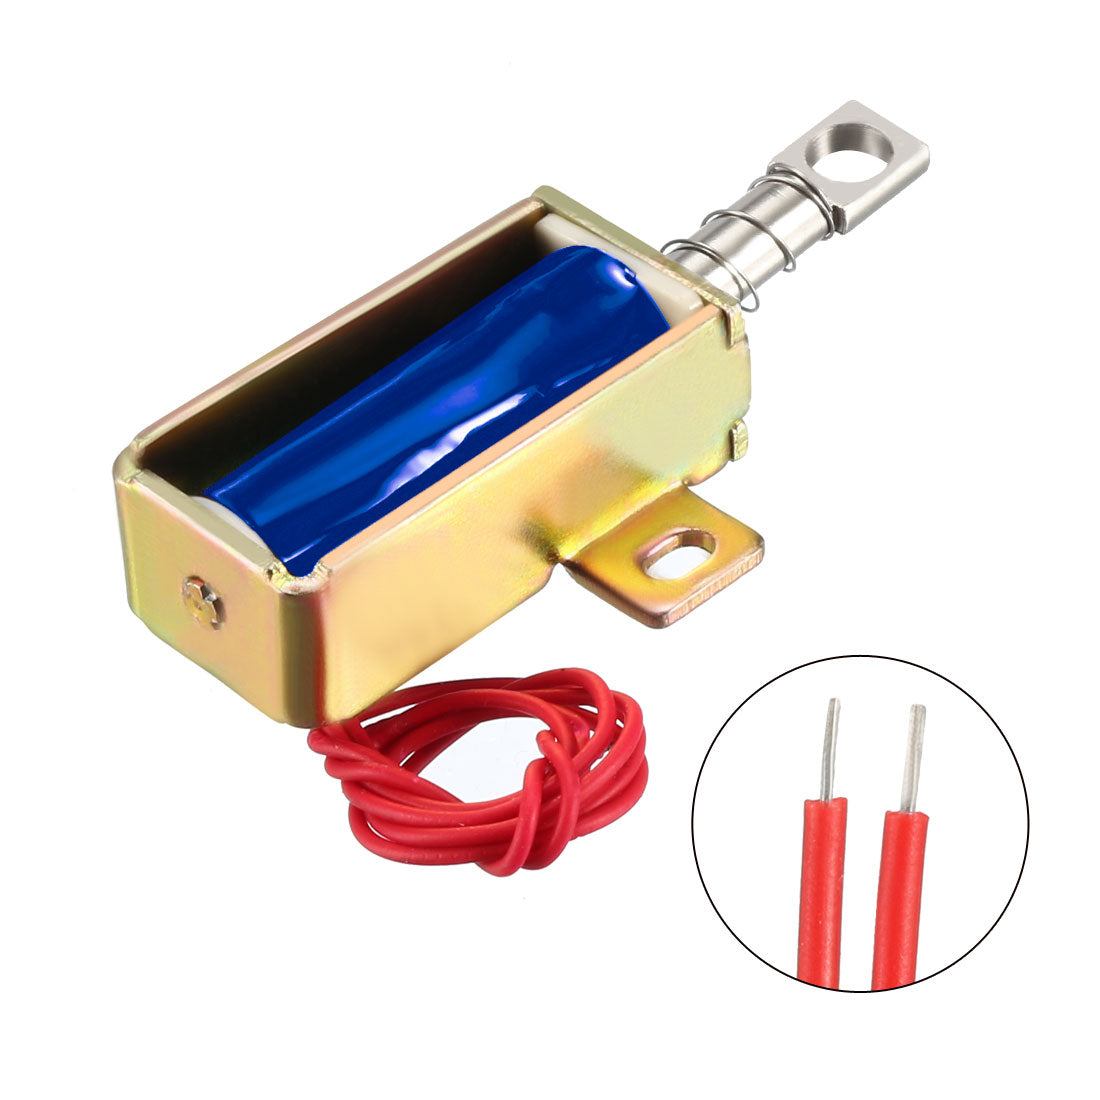 uxcell Uxcell DC 24V 0.8A 5mm Mini Electromagnetic Solenoid Lock Pull Type for Electirc Door Lock